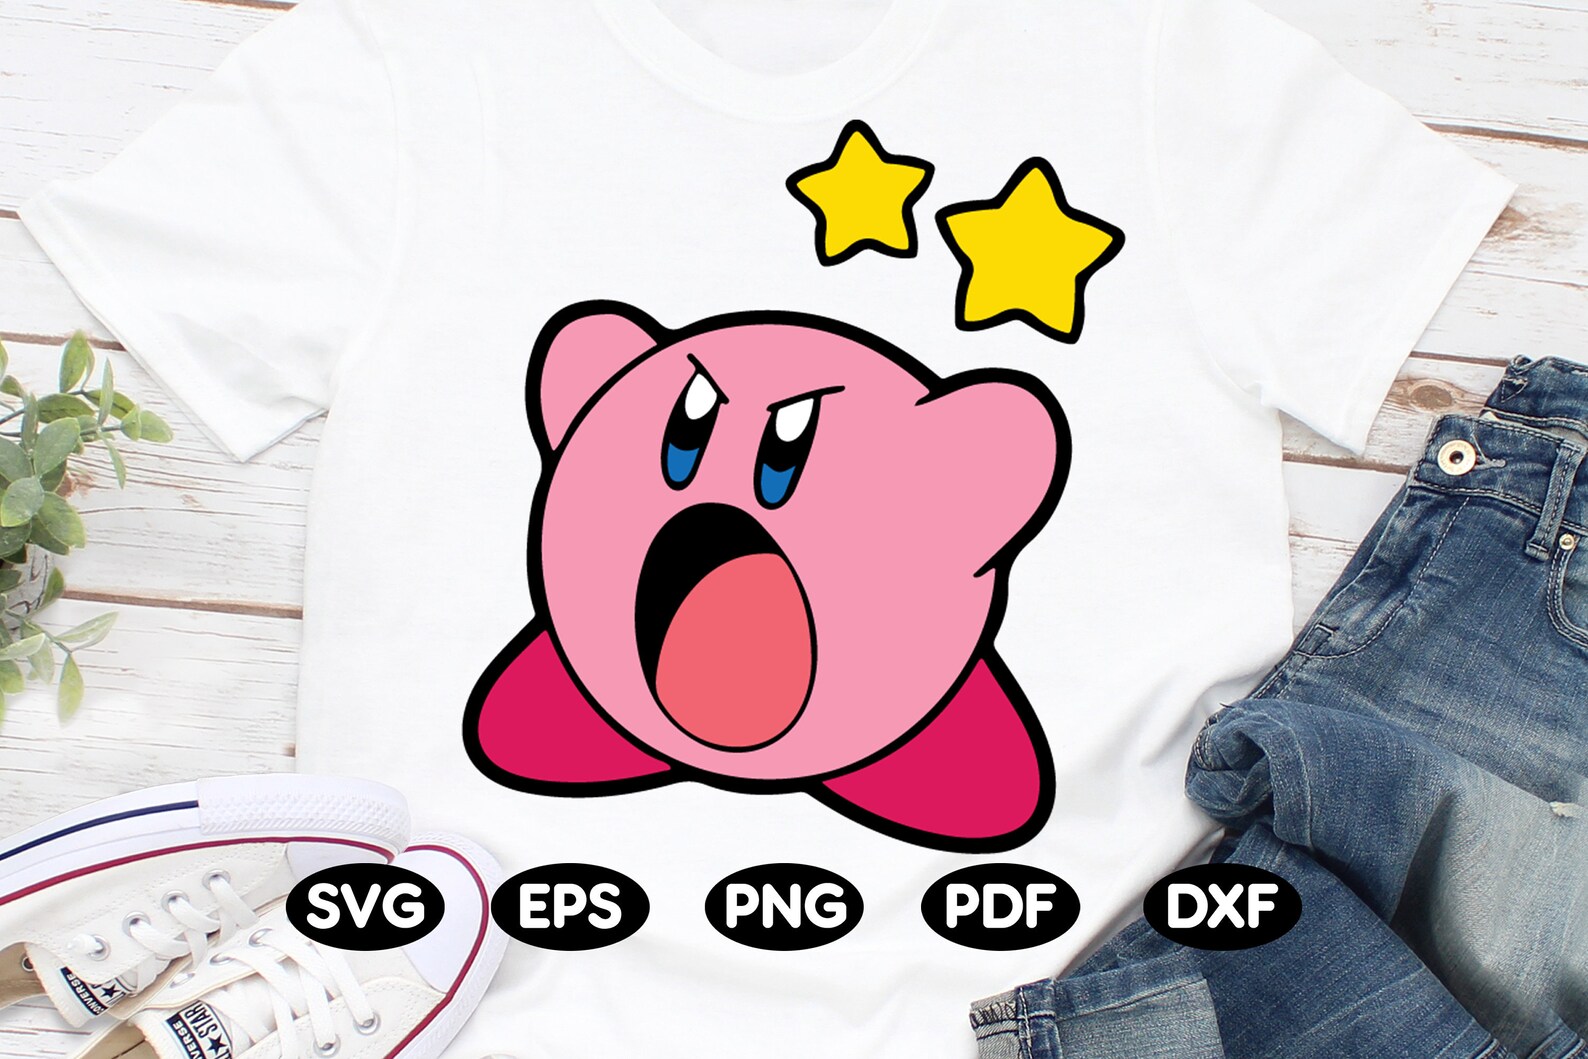 Vector Kirby in Svg Png Dxf Eps Pdf format Instant download | Etsy